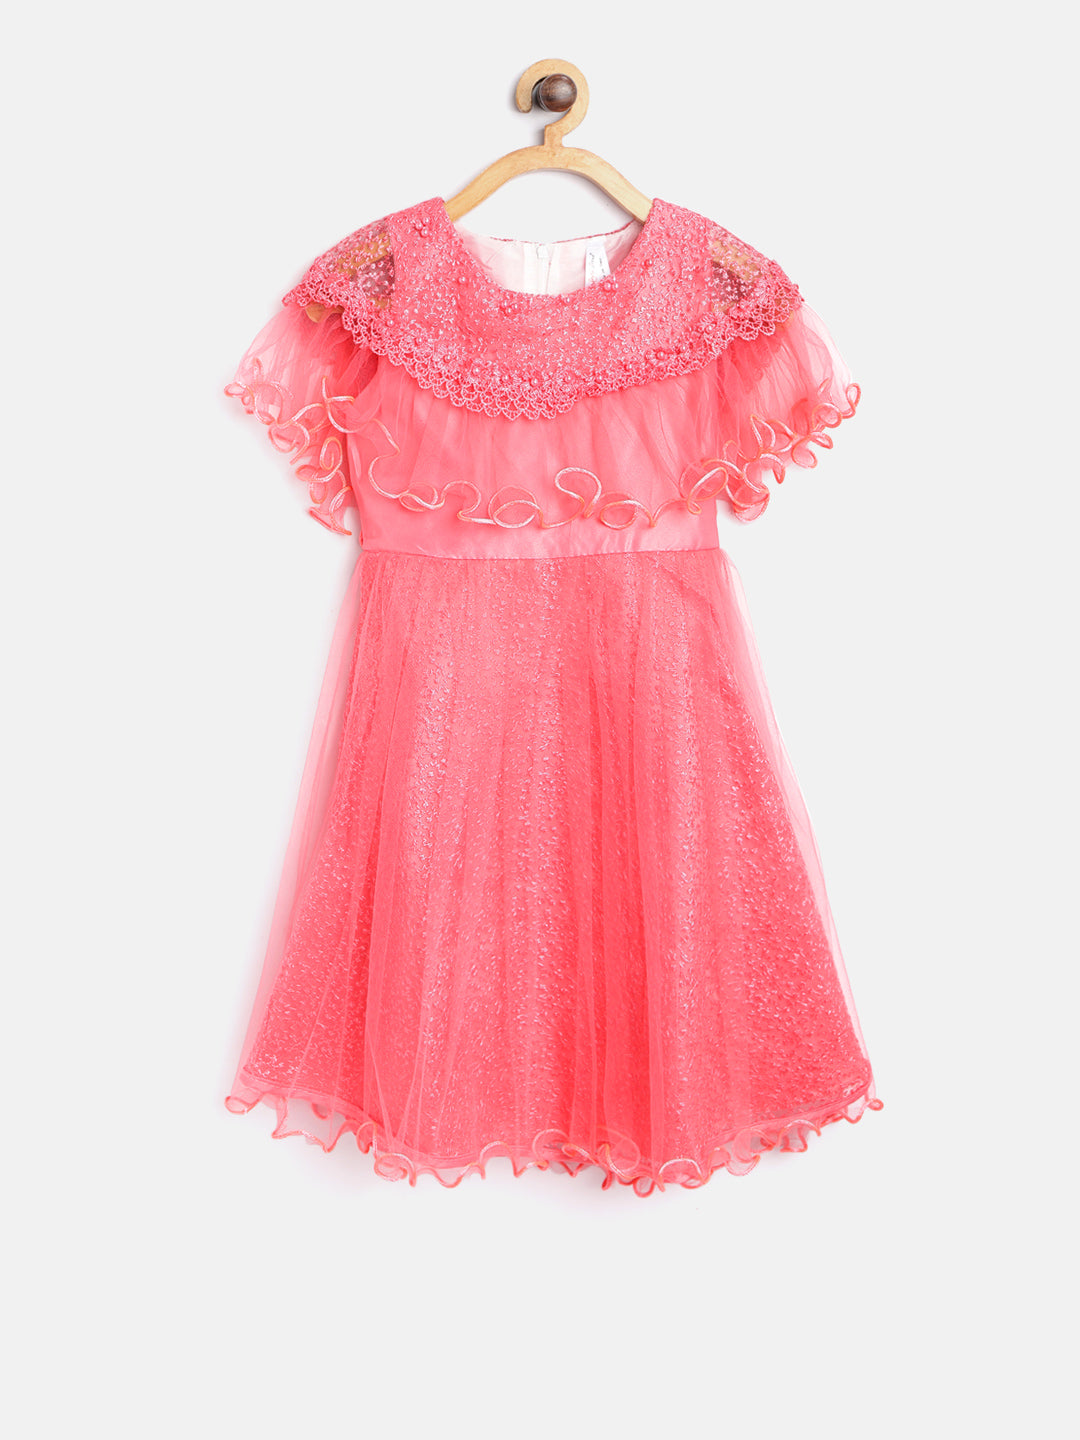 Girls Fuchsia Pink embroidered and embellished Party Dress